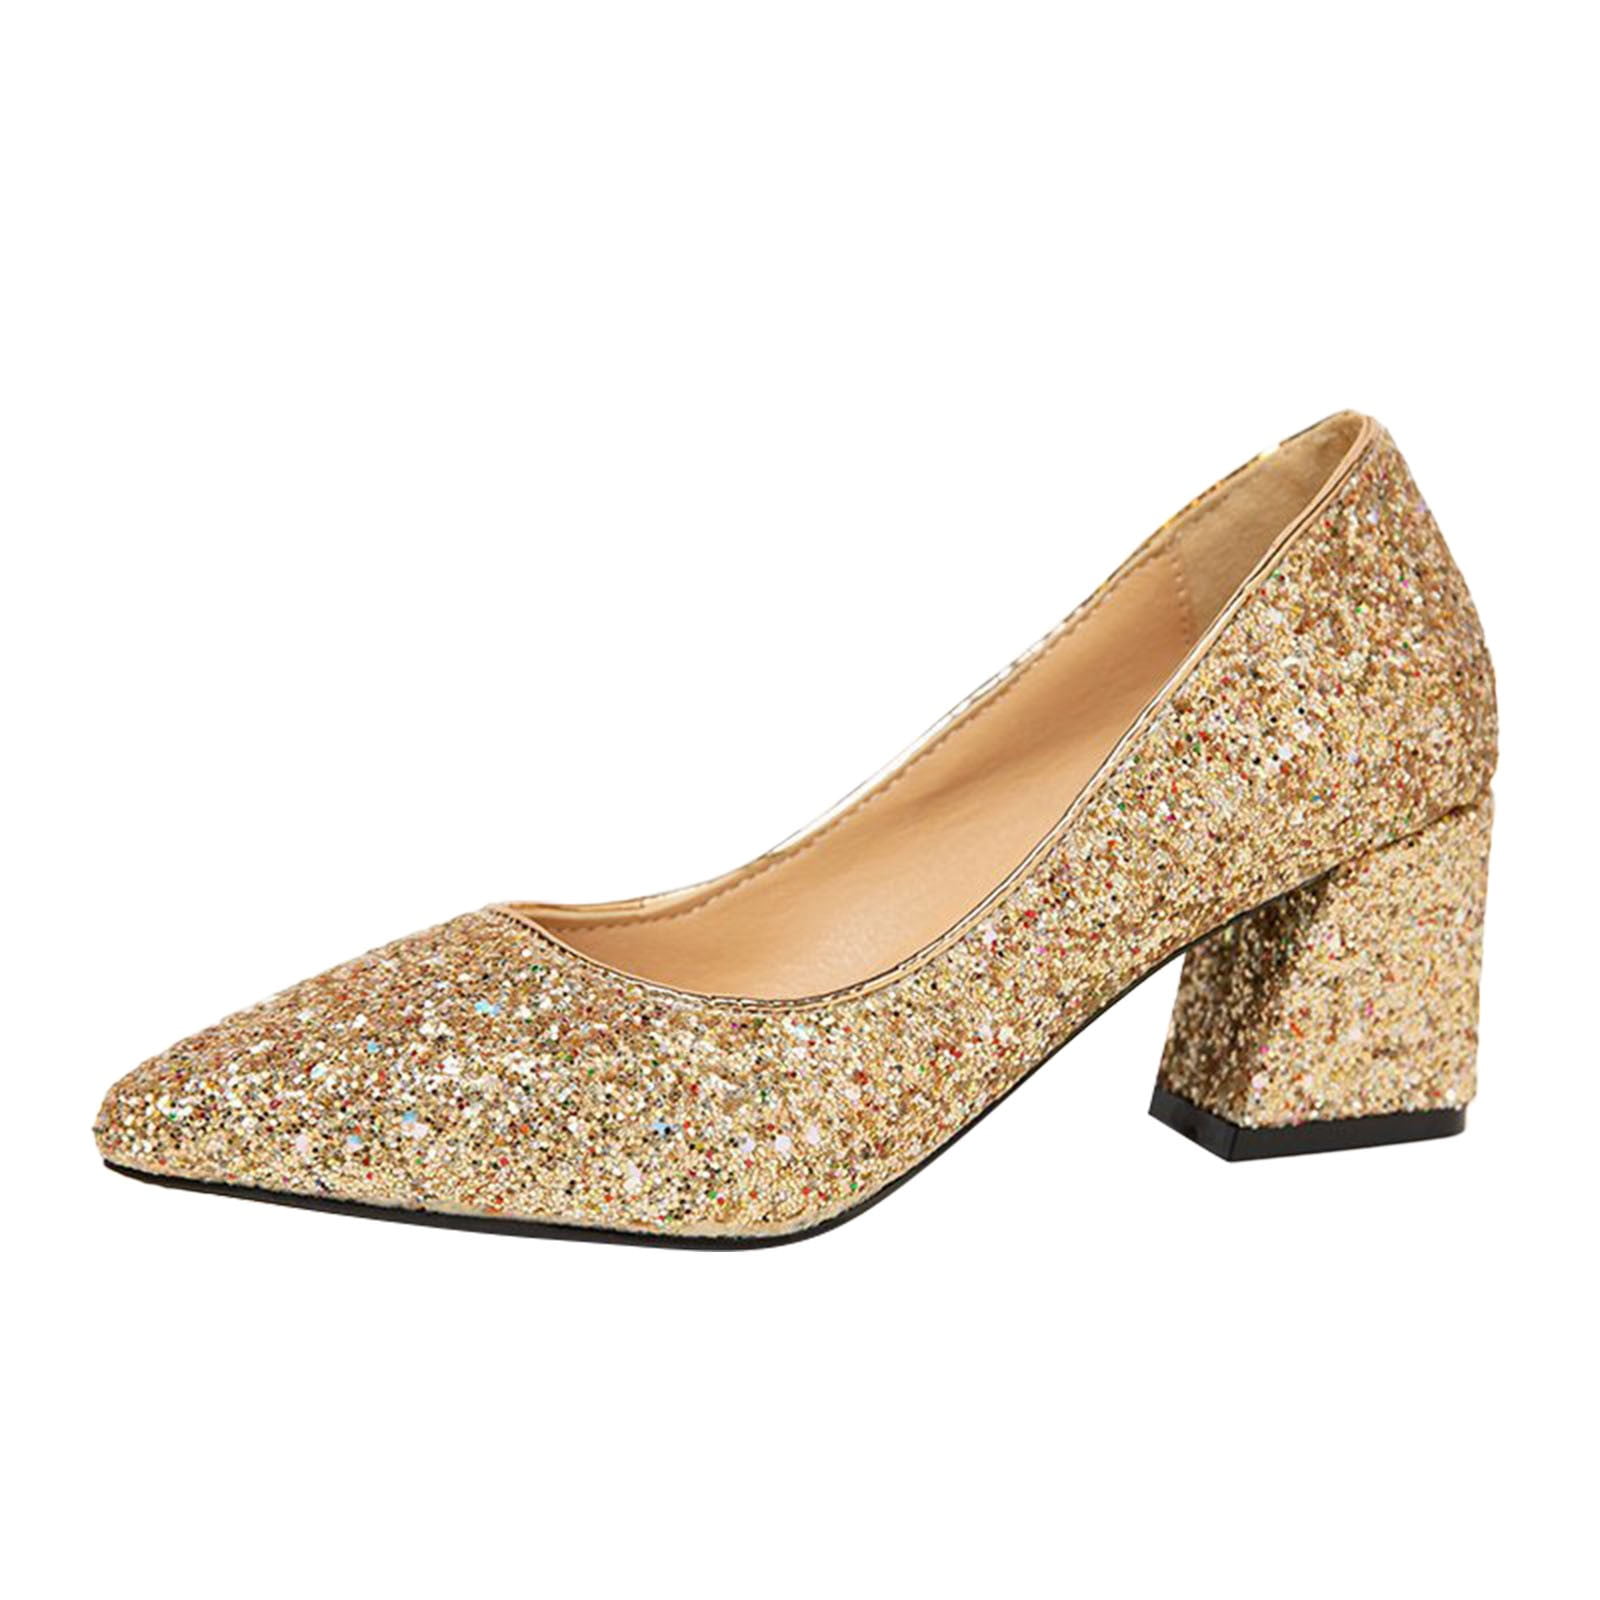 Gold Shoes For Wedding: 18 Dazzling Ideas + Faqs